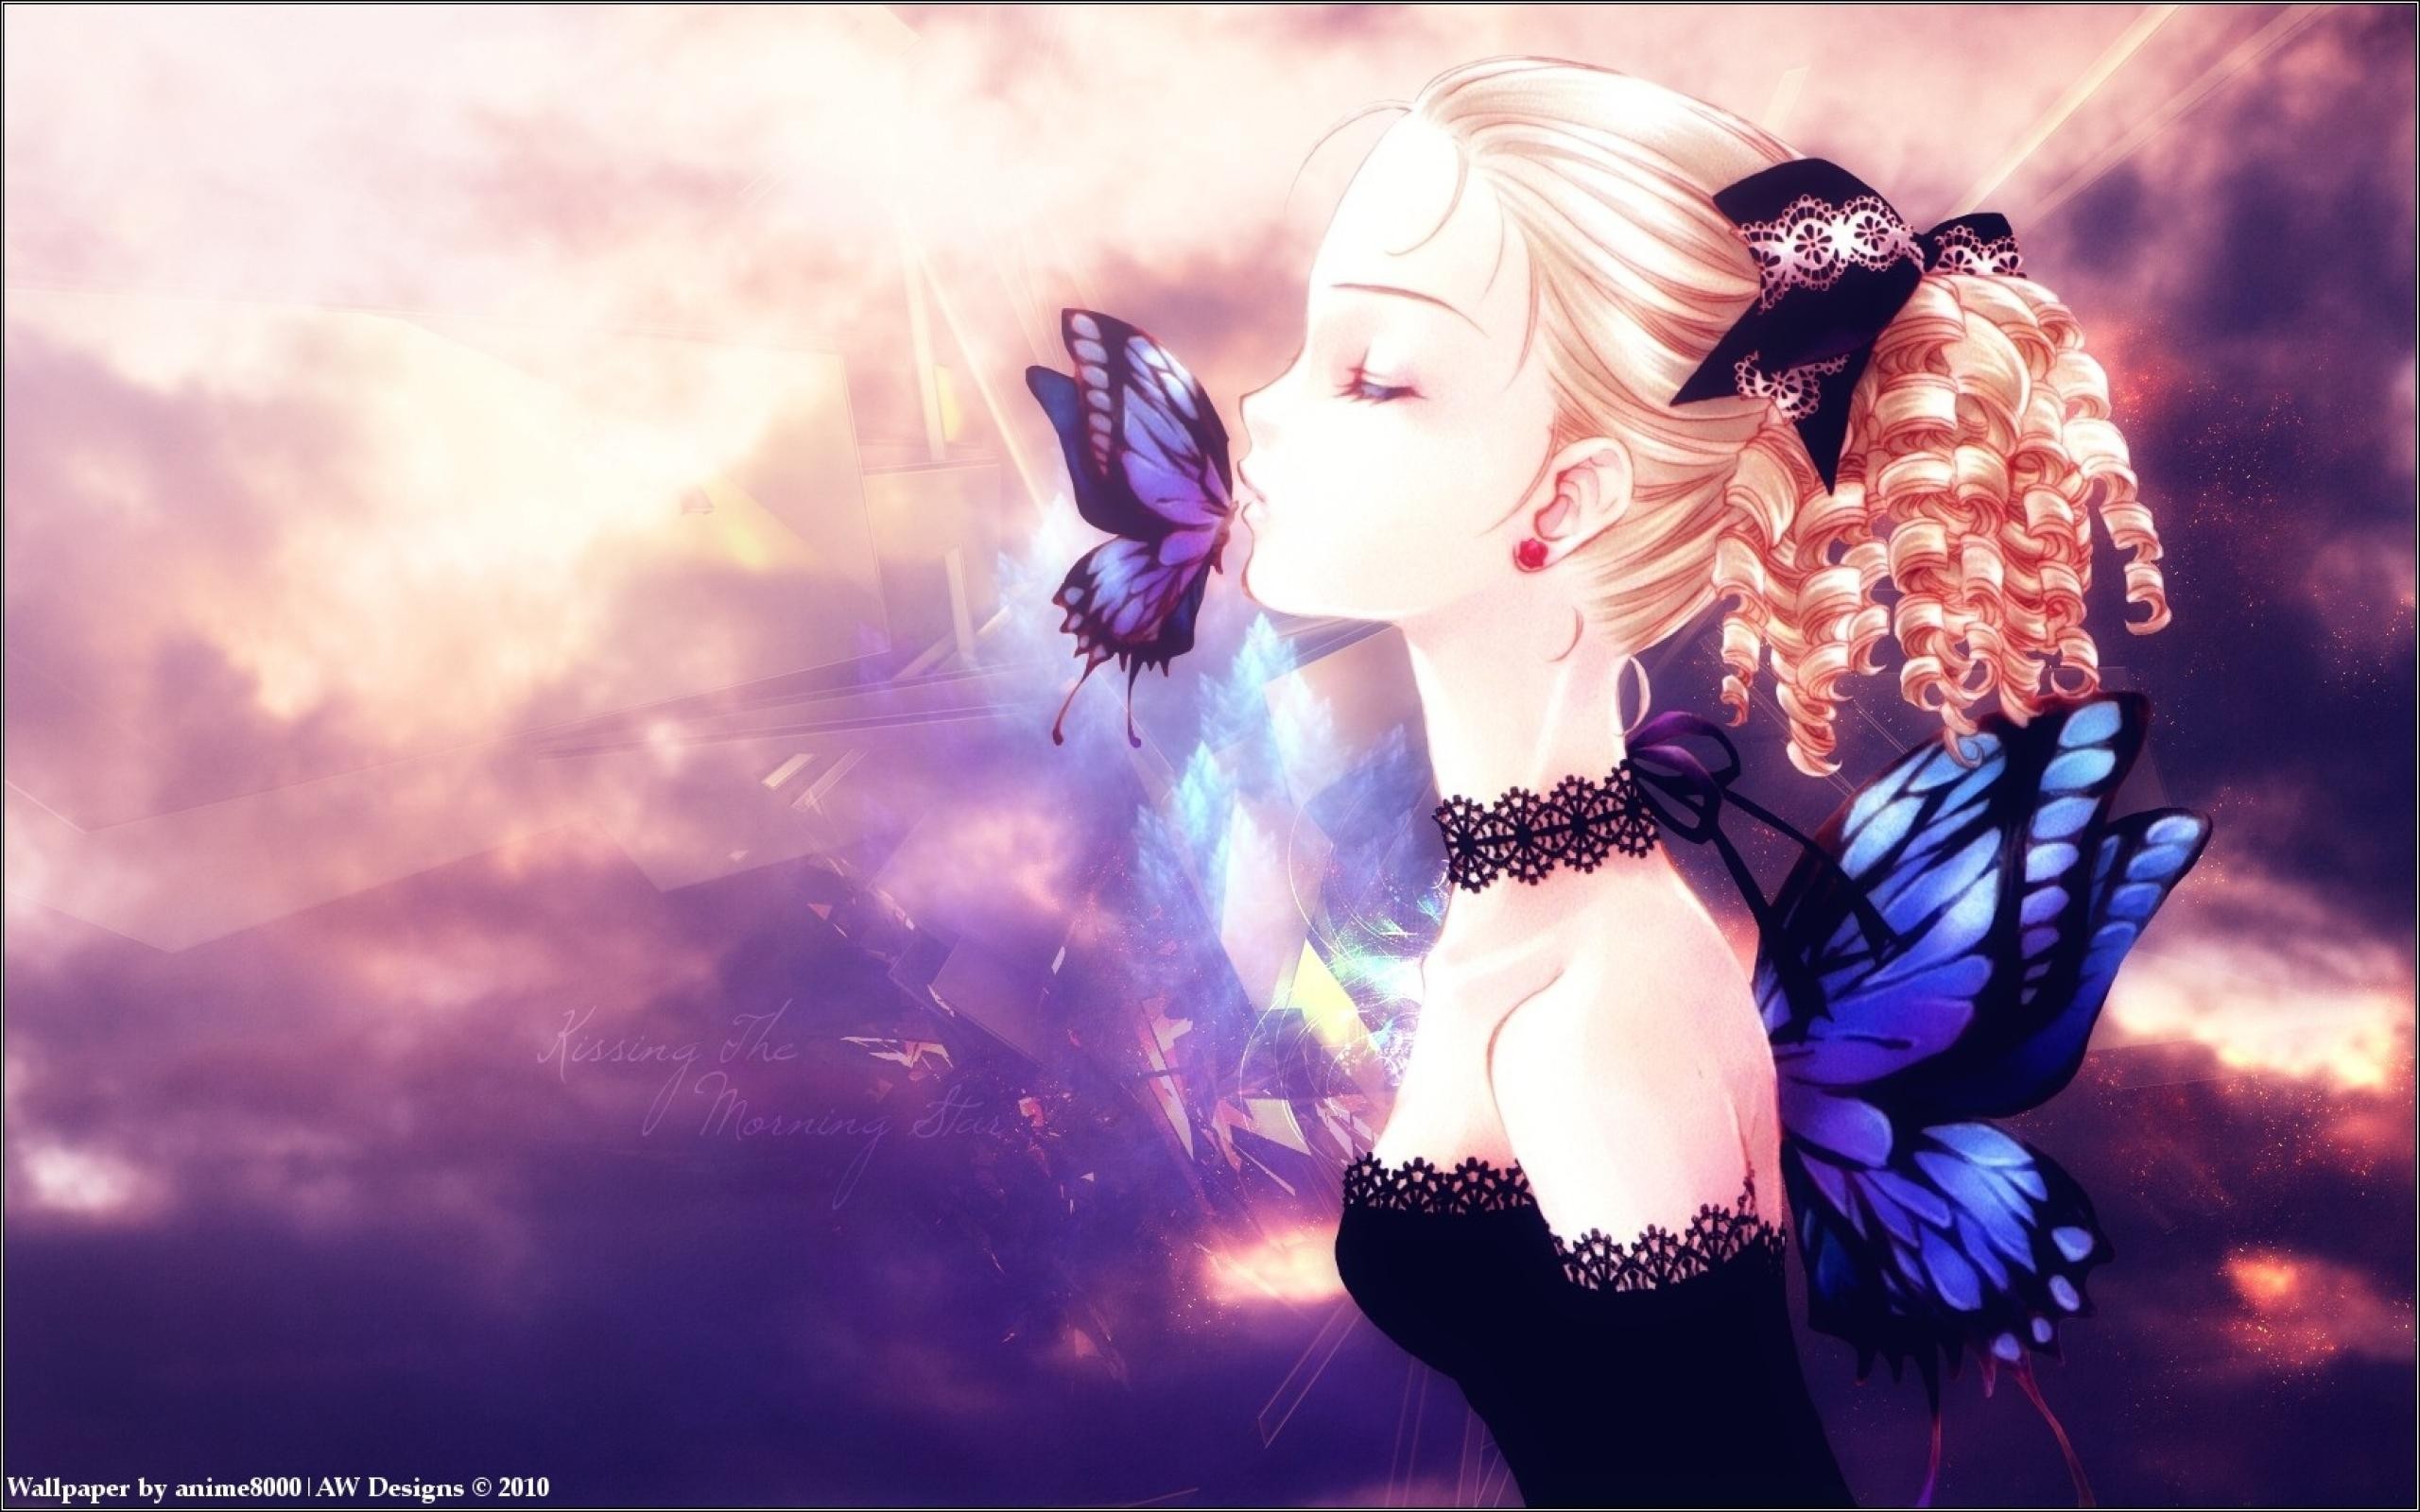 Anime 2560x1600 anime girls anime original characters closed eyes butterfly wings 2010 (Year) women face profile animals insect dress choker earring fantasy art fantasy girl